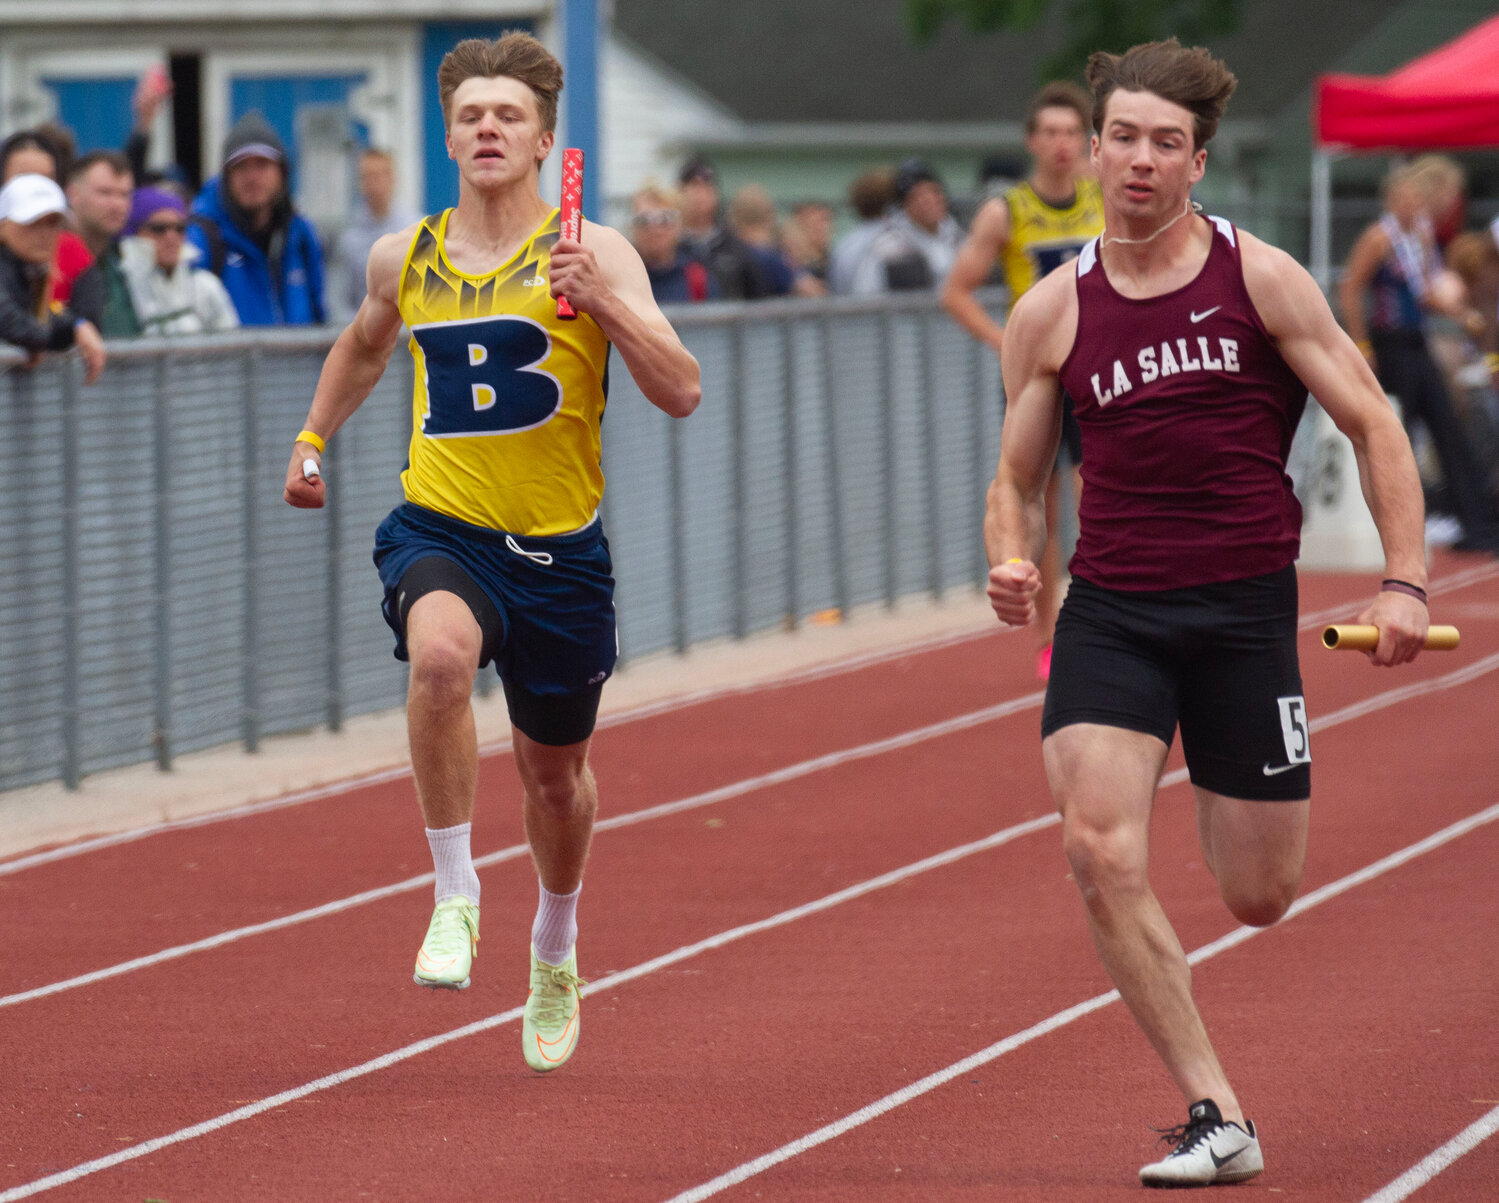 Barrington High School's Iain DeBoth (left) and LaSalle's Brady Fisher, of Barrington, compete in the 4x100-meter relay race at the state track championship.